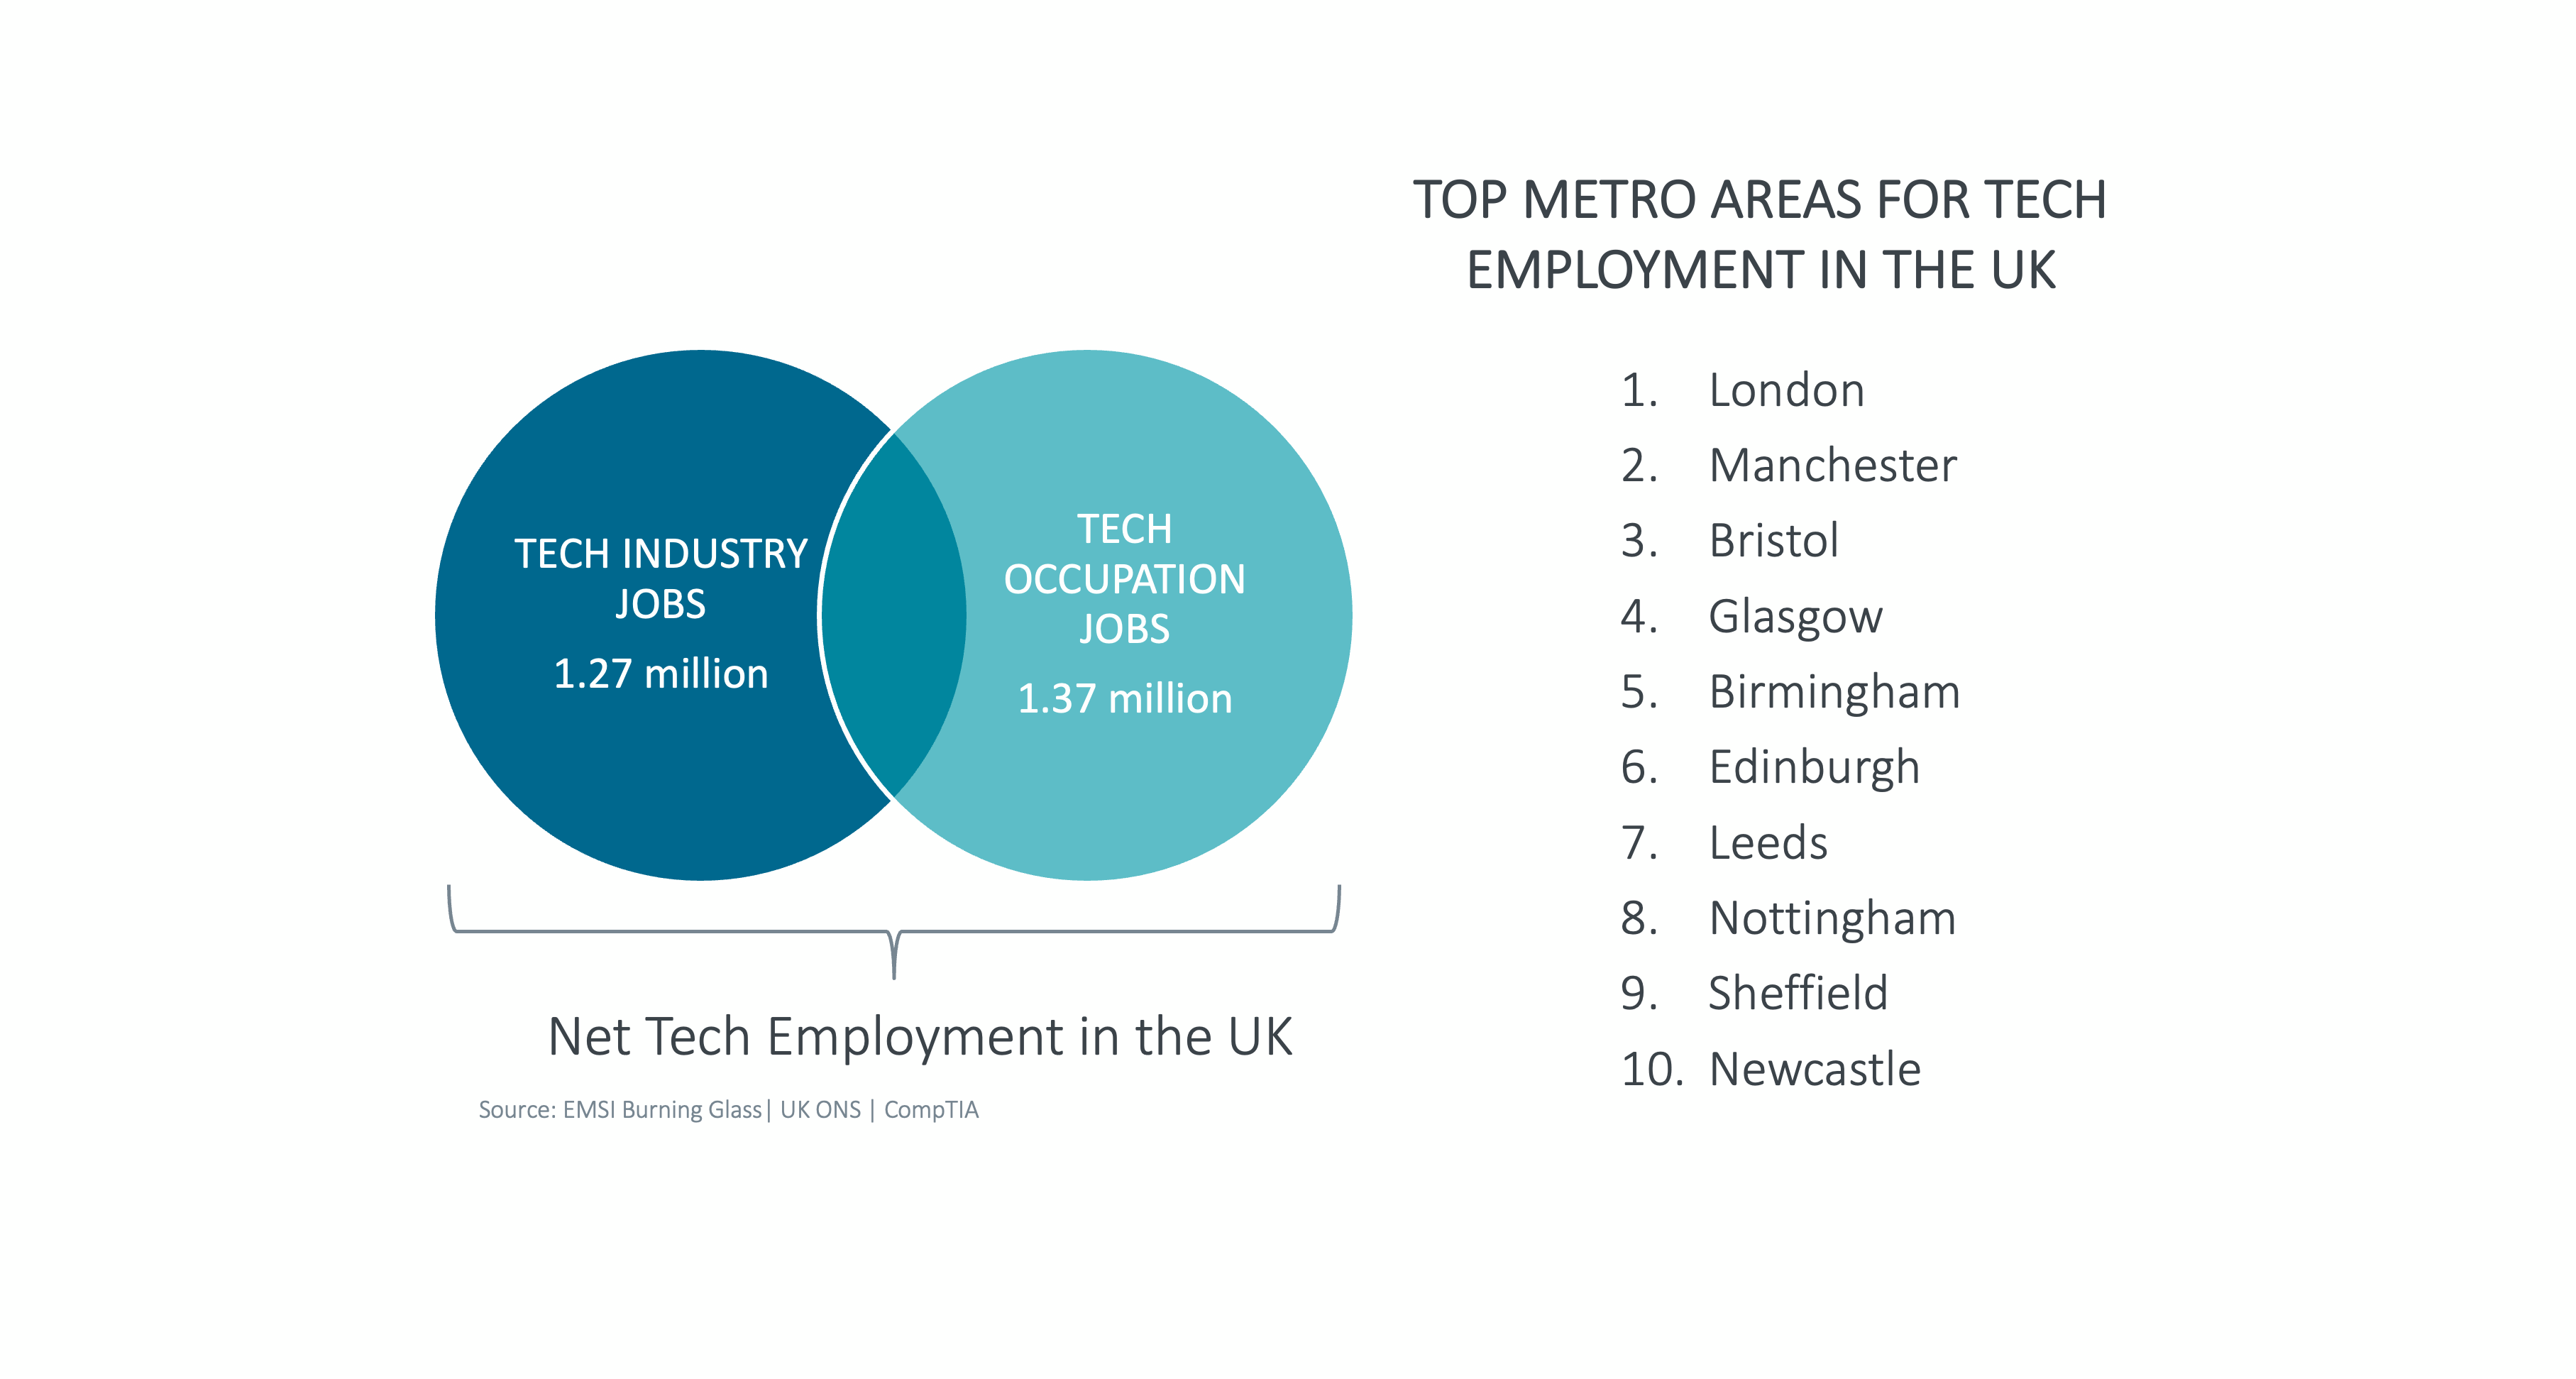 Top Metro Areas For Tech Employment In The UK